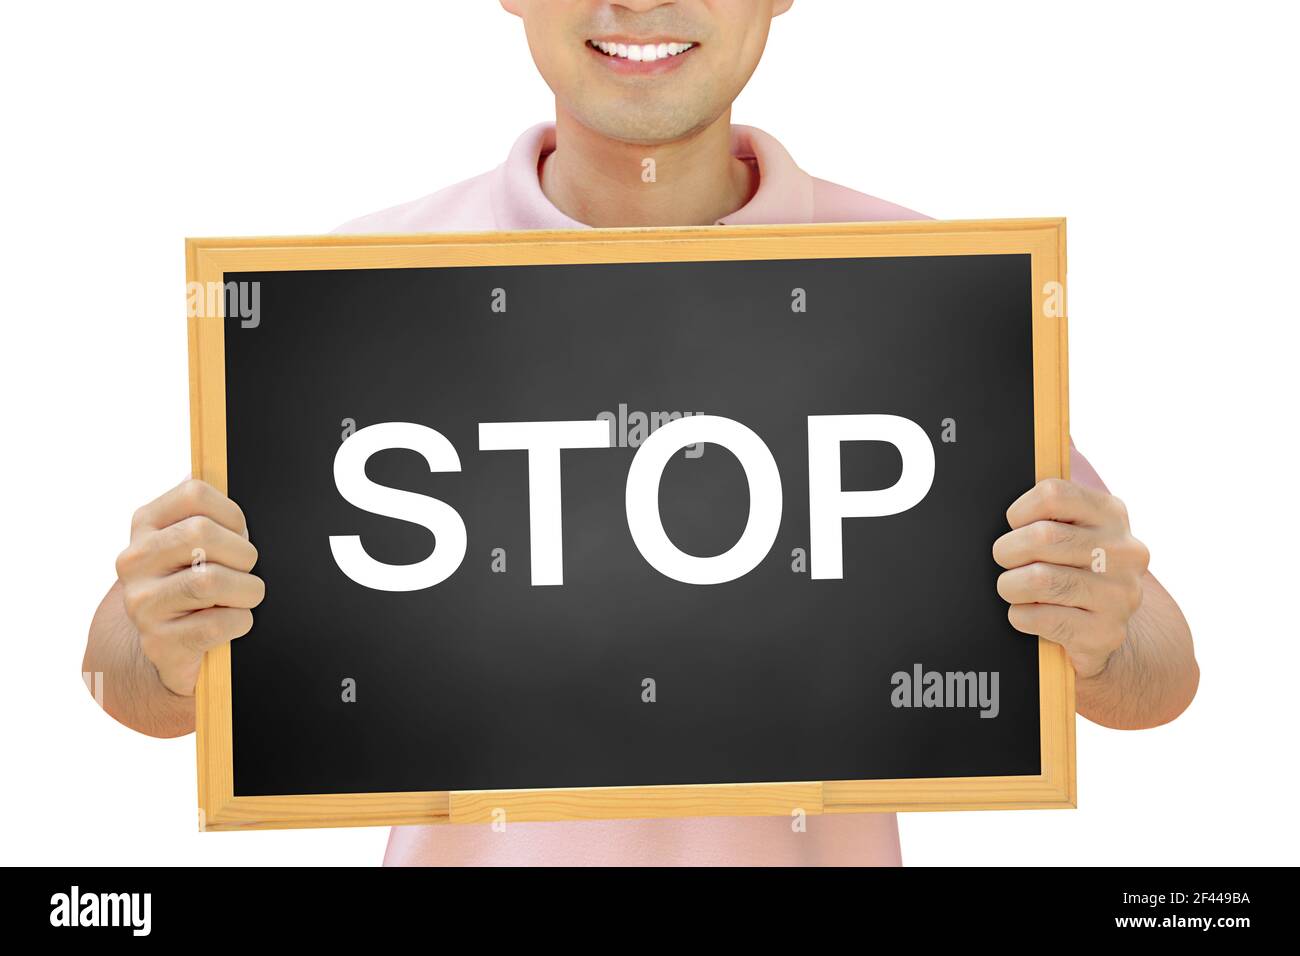 STOP sign on blackboard held by smiling man Stock Photo